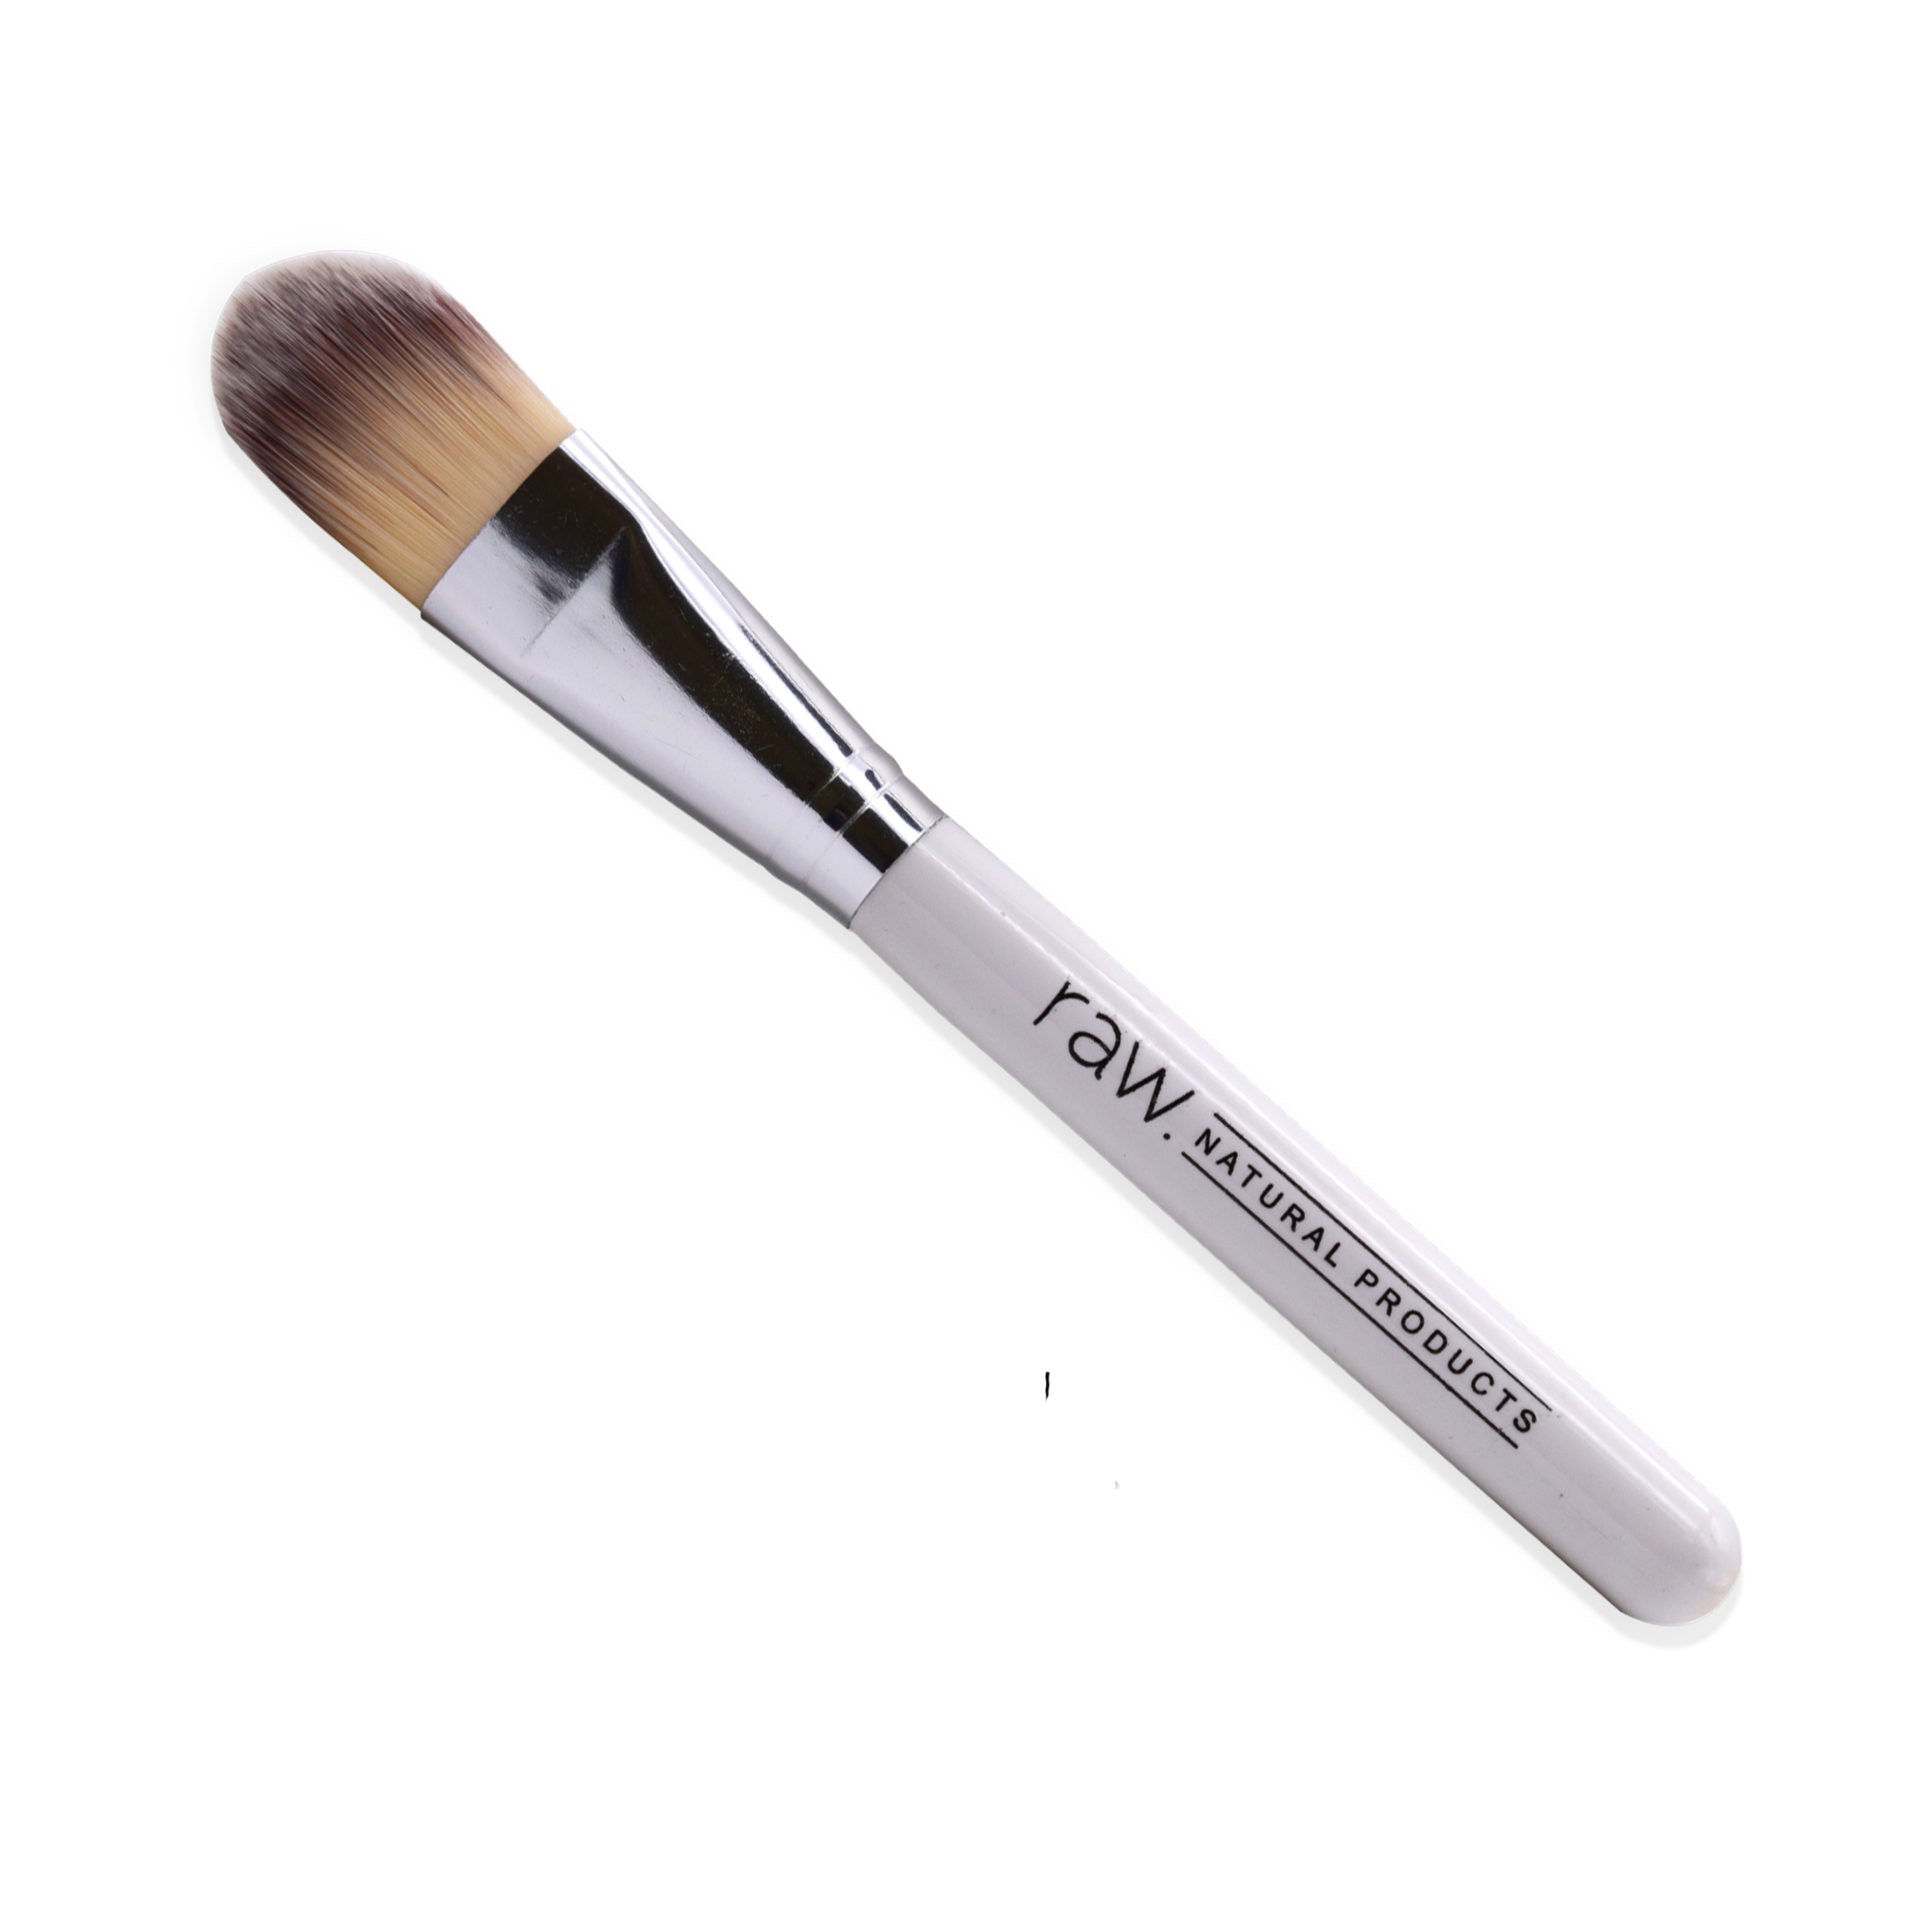 Mud All Natural Face Mask - FINAL SALE Home & Lifestyle Brush